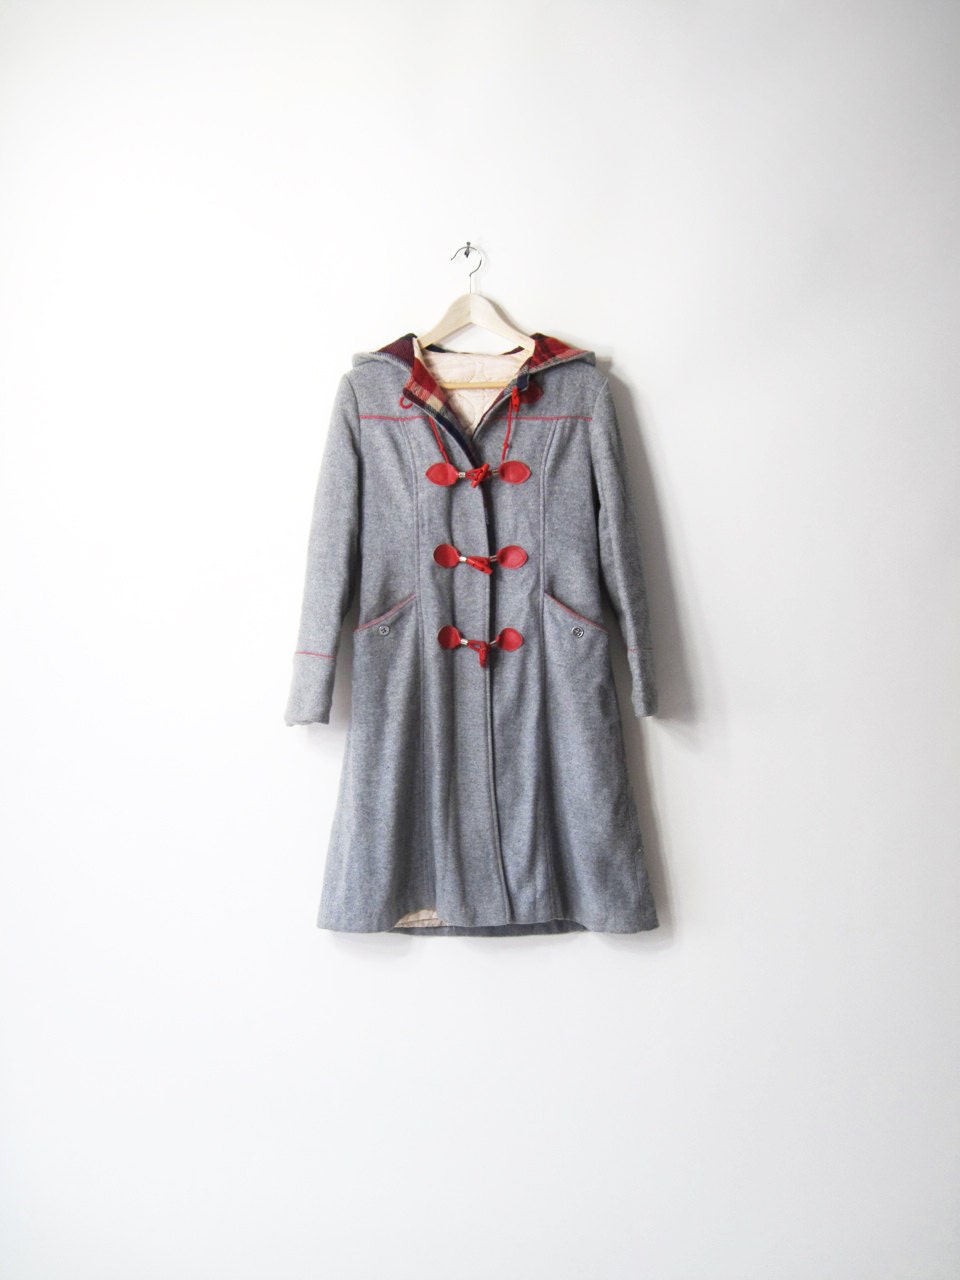 Vintage Gray & Red Winter Toggle Coat with Hood xs-s - twigandspokevintage